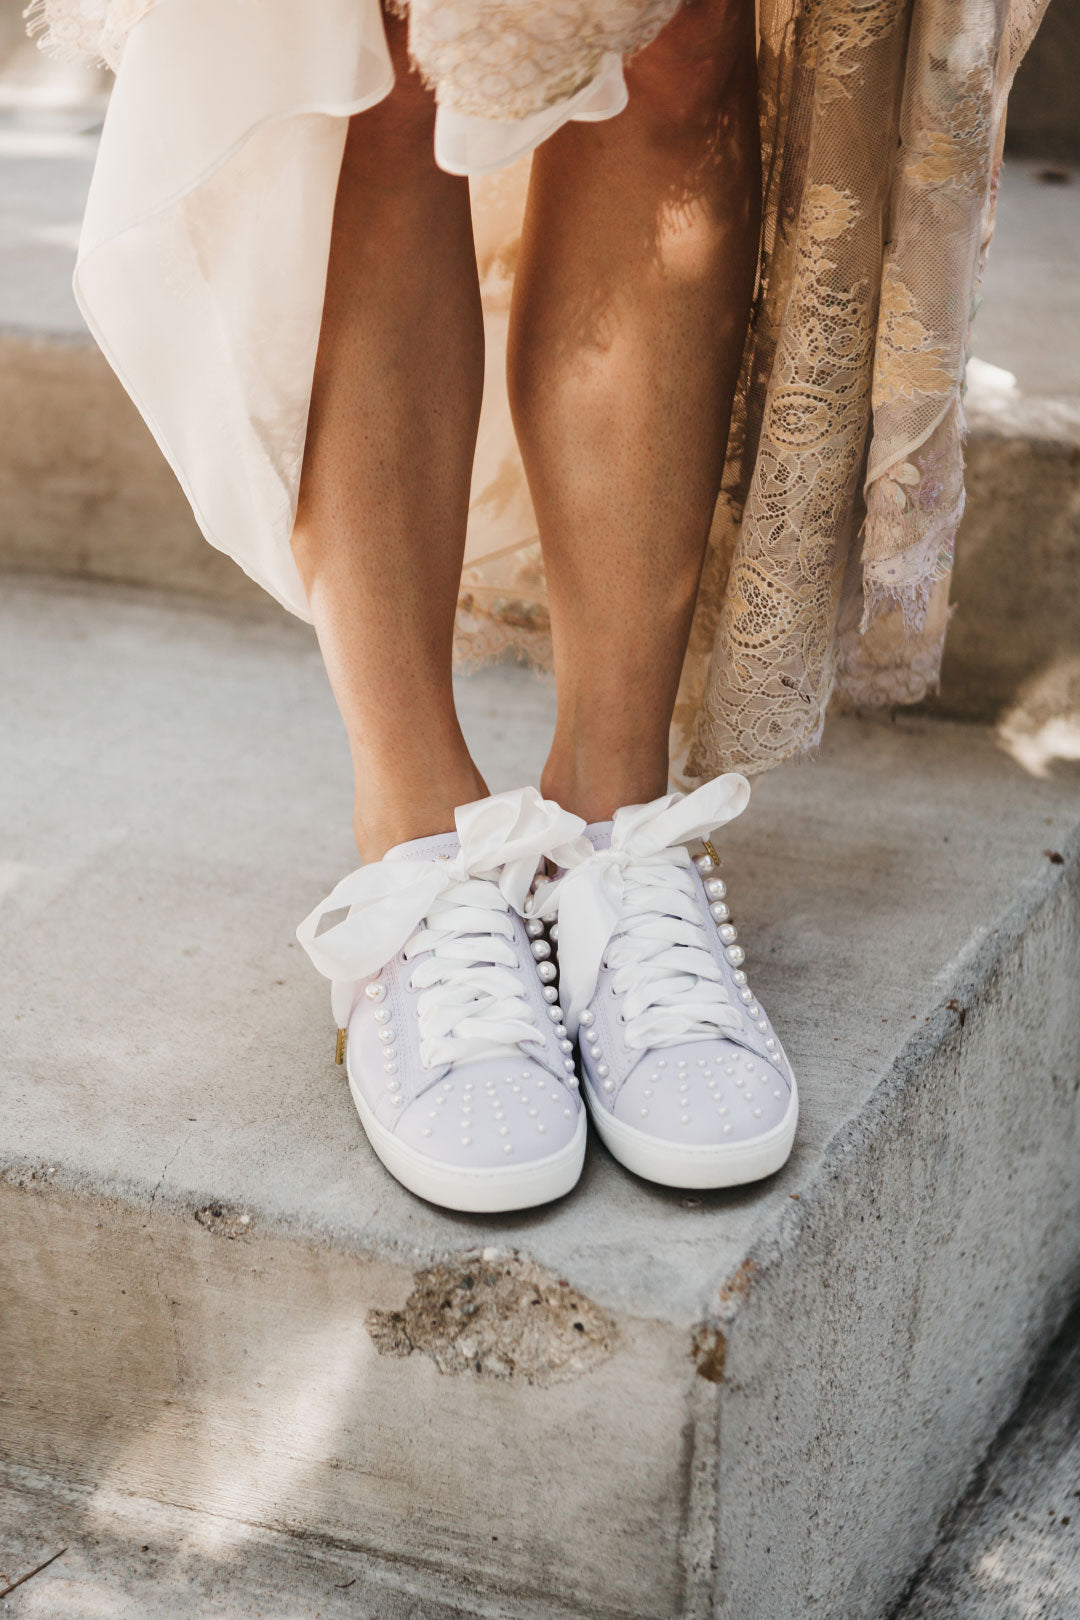 Bride wears pearl decorated tennis shoes